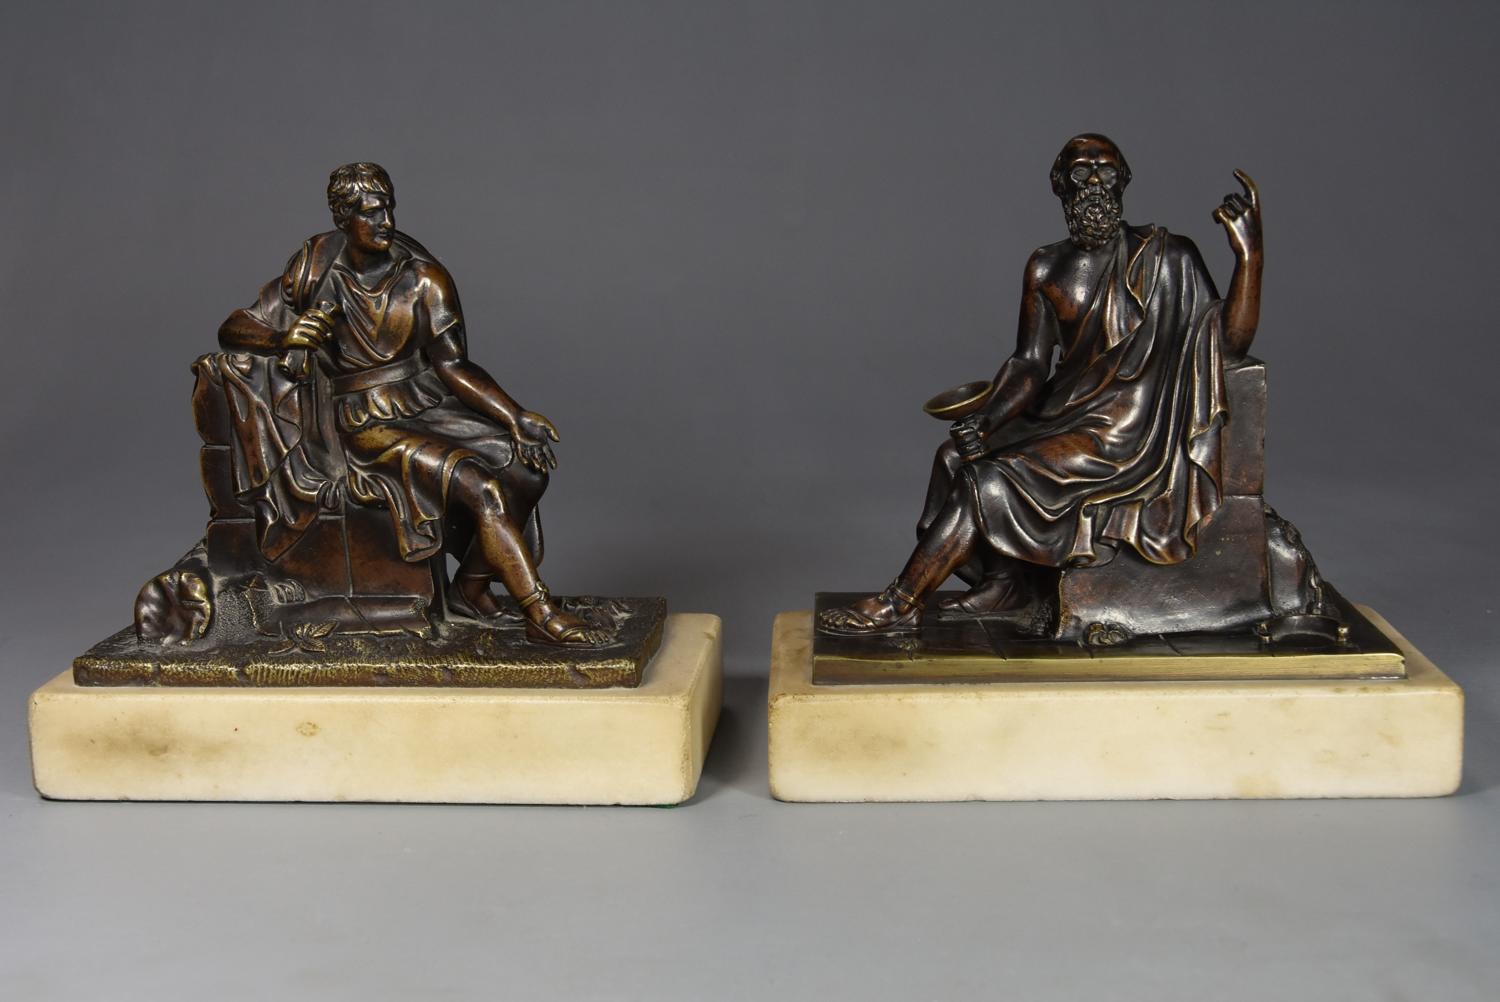 Fine quality pair of French bronzes of Socrates and Leon of Salamis